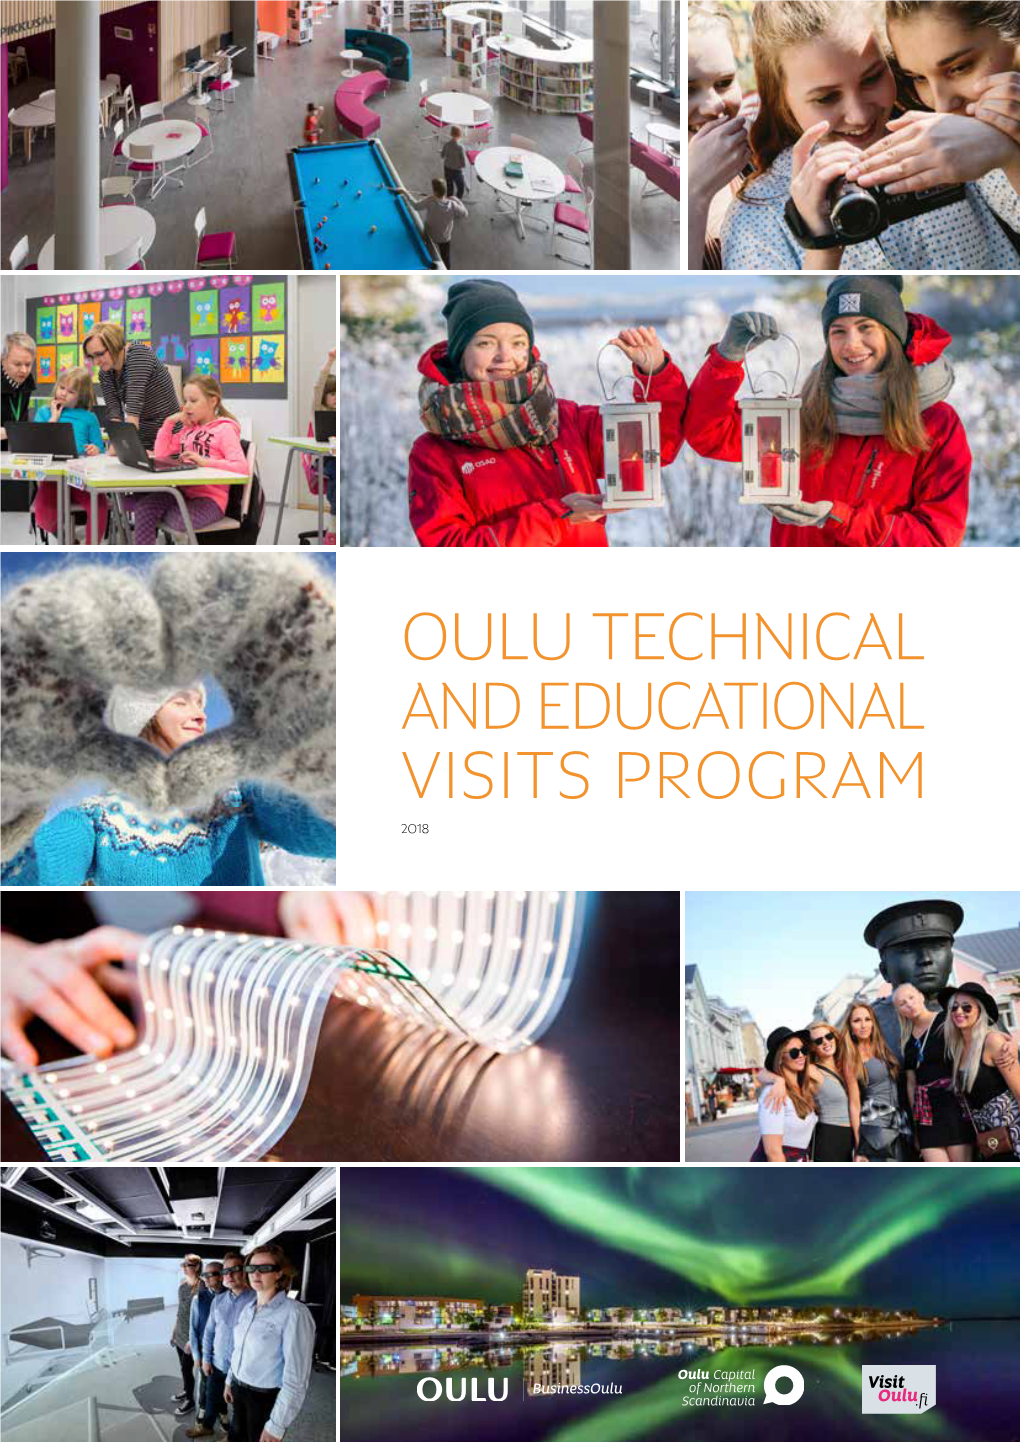 Oulu Technical and Educational Visits Program 2018